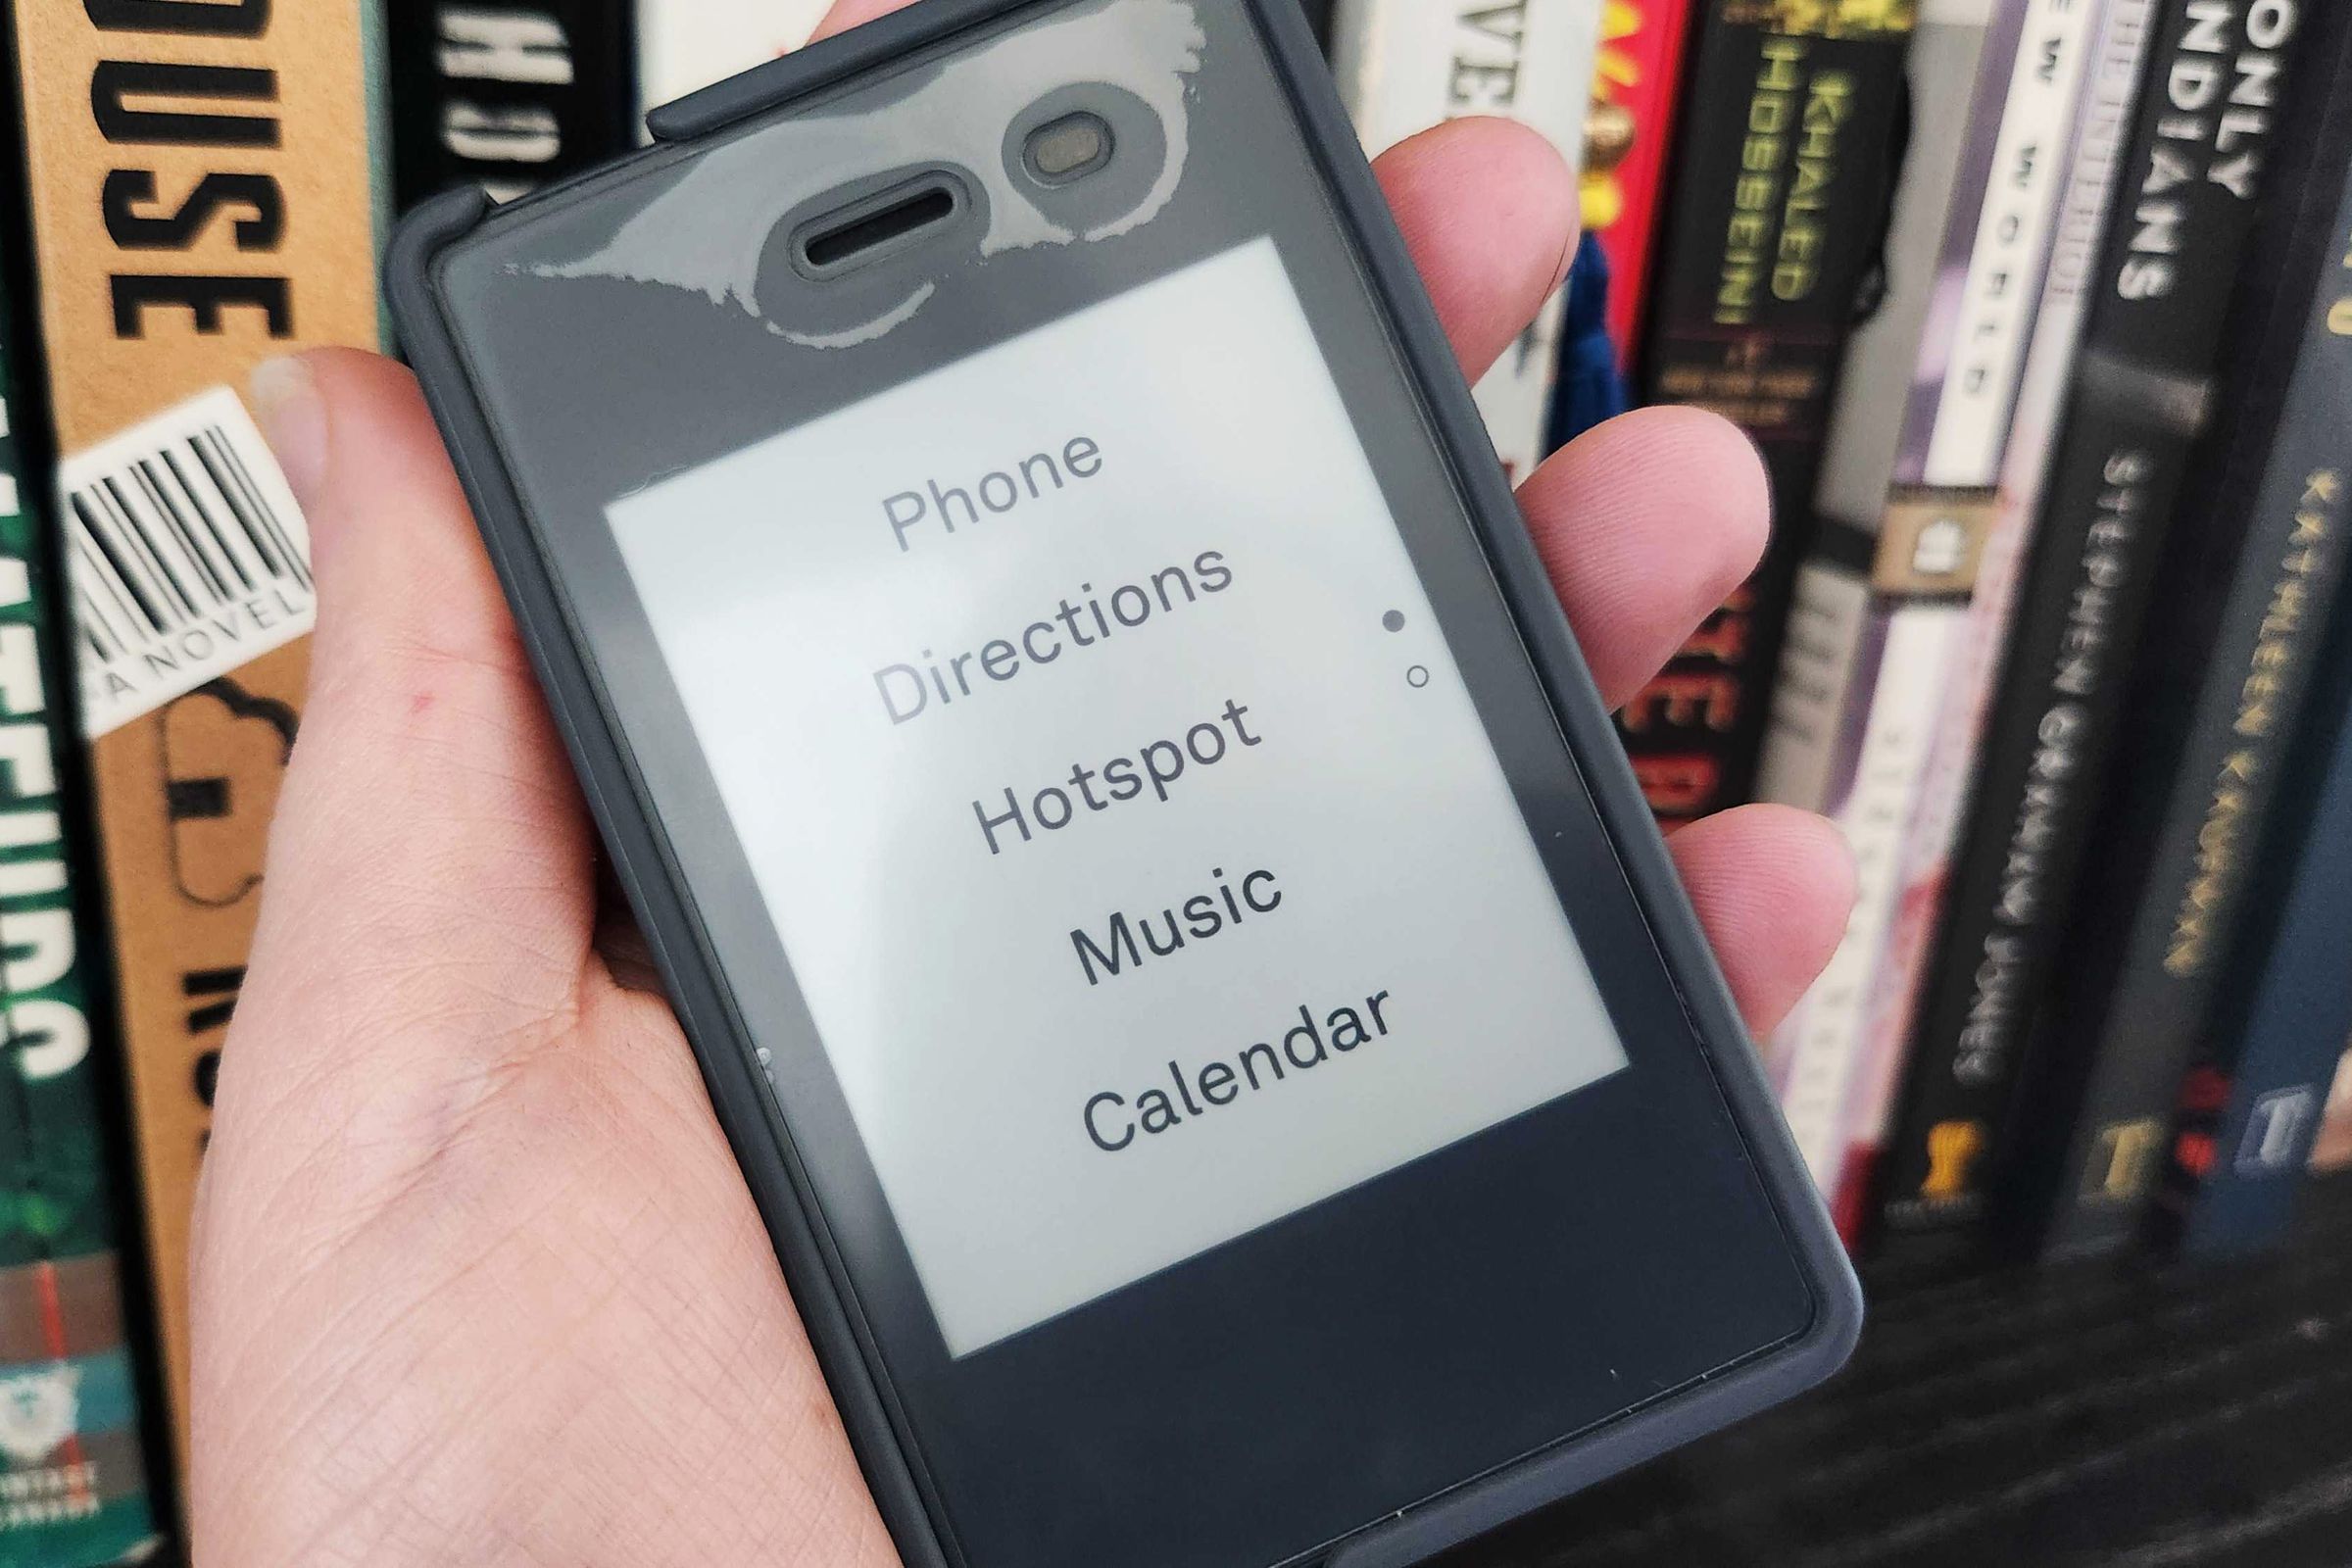 A small cellphone held in a person’s hand with books in the background.